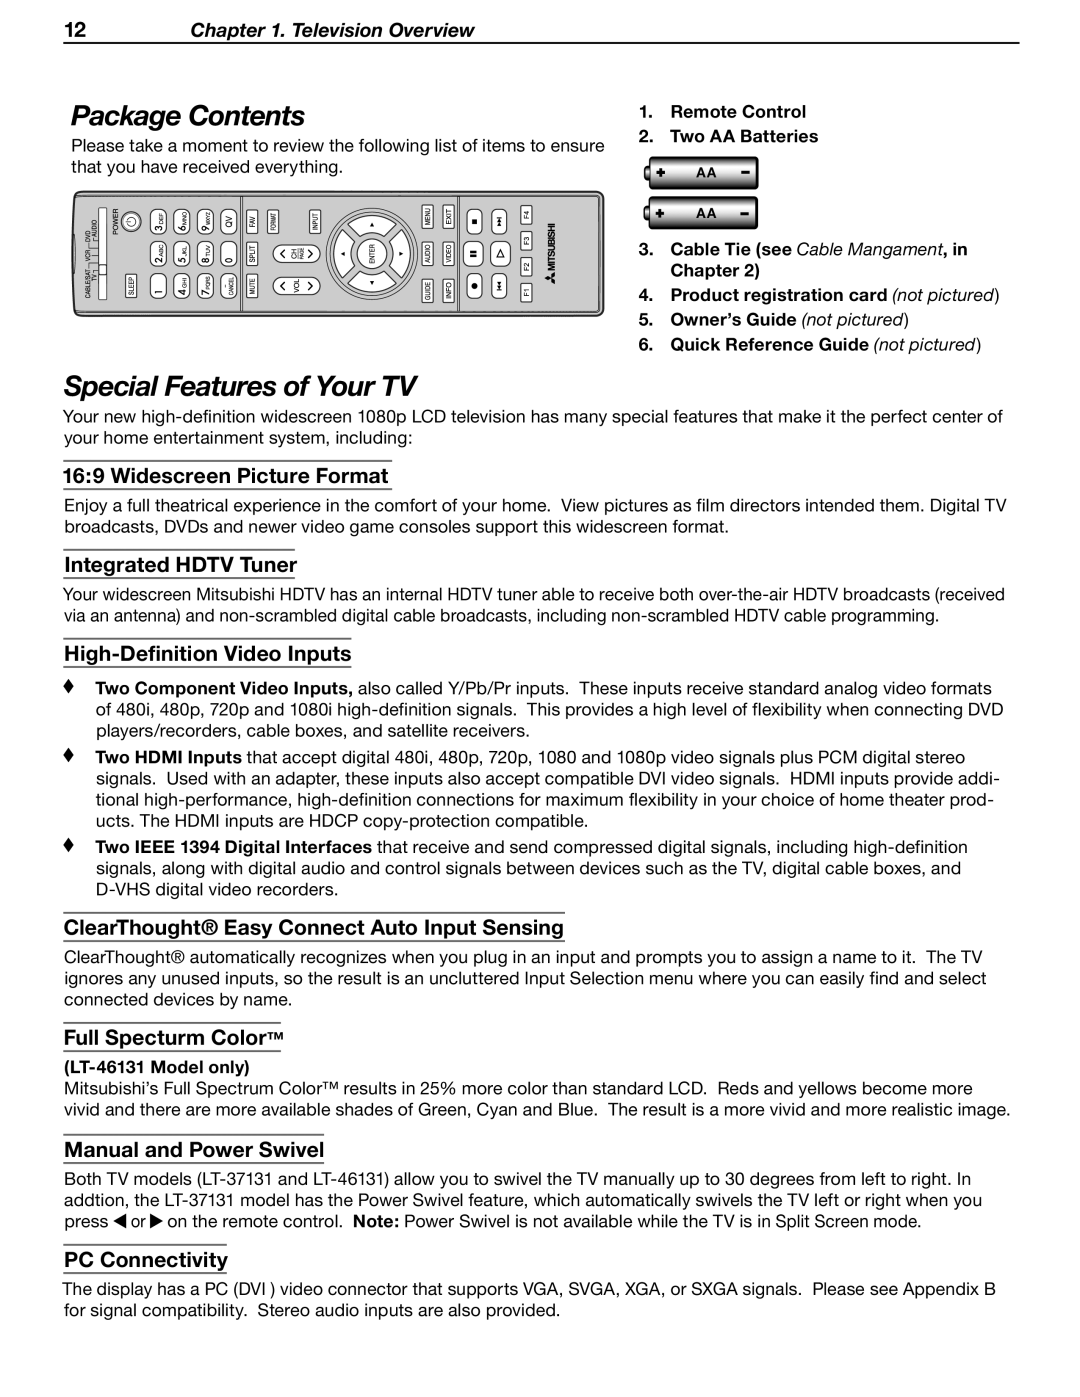 Mitsubishi Electronics LT-37131 Package Contents, Special Features of Your TV, Widescreen Picture Format, PC Connectivity 